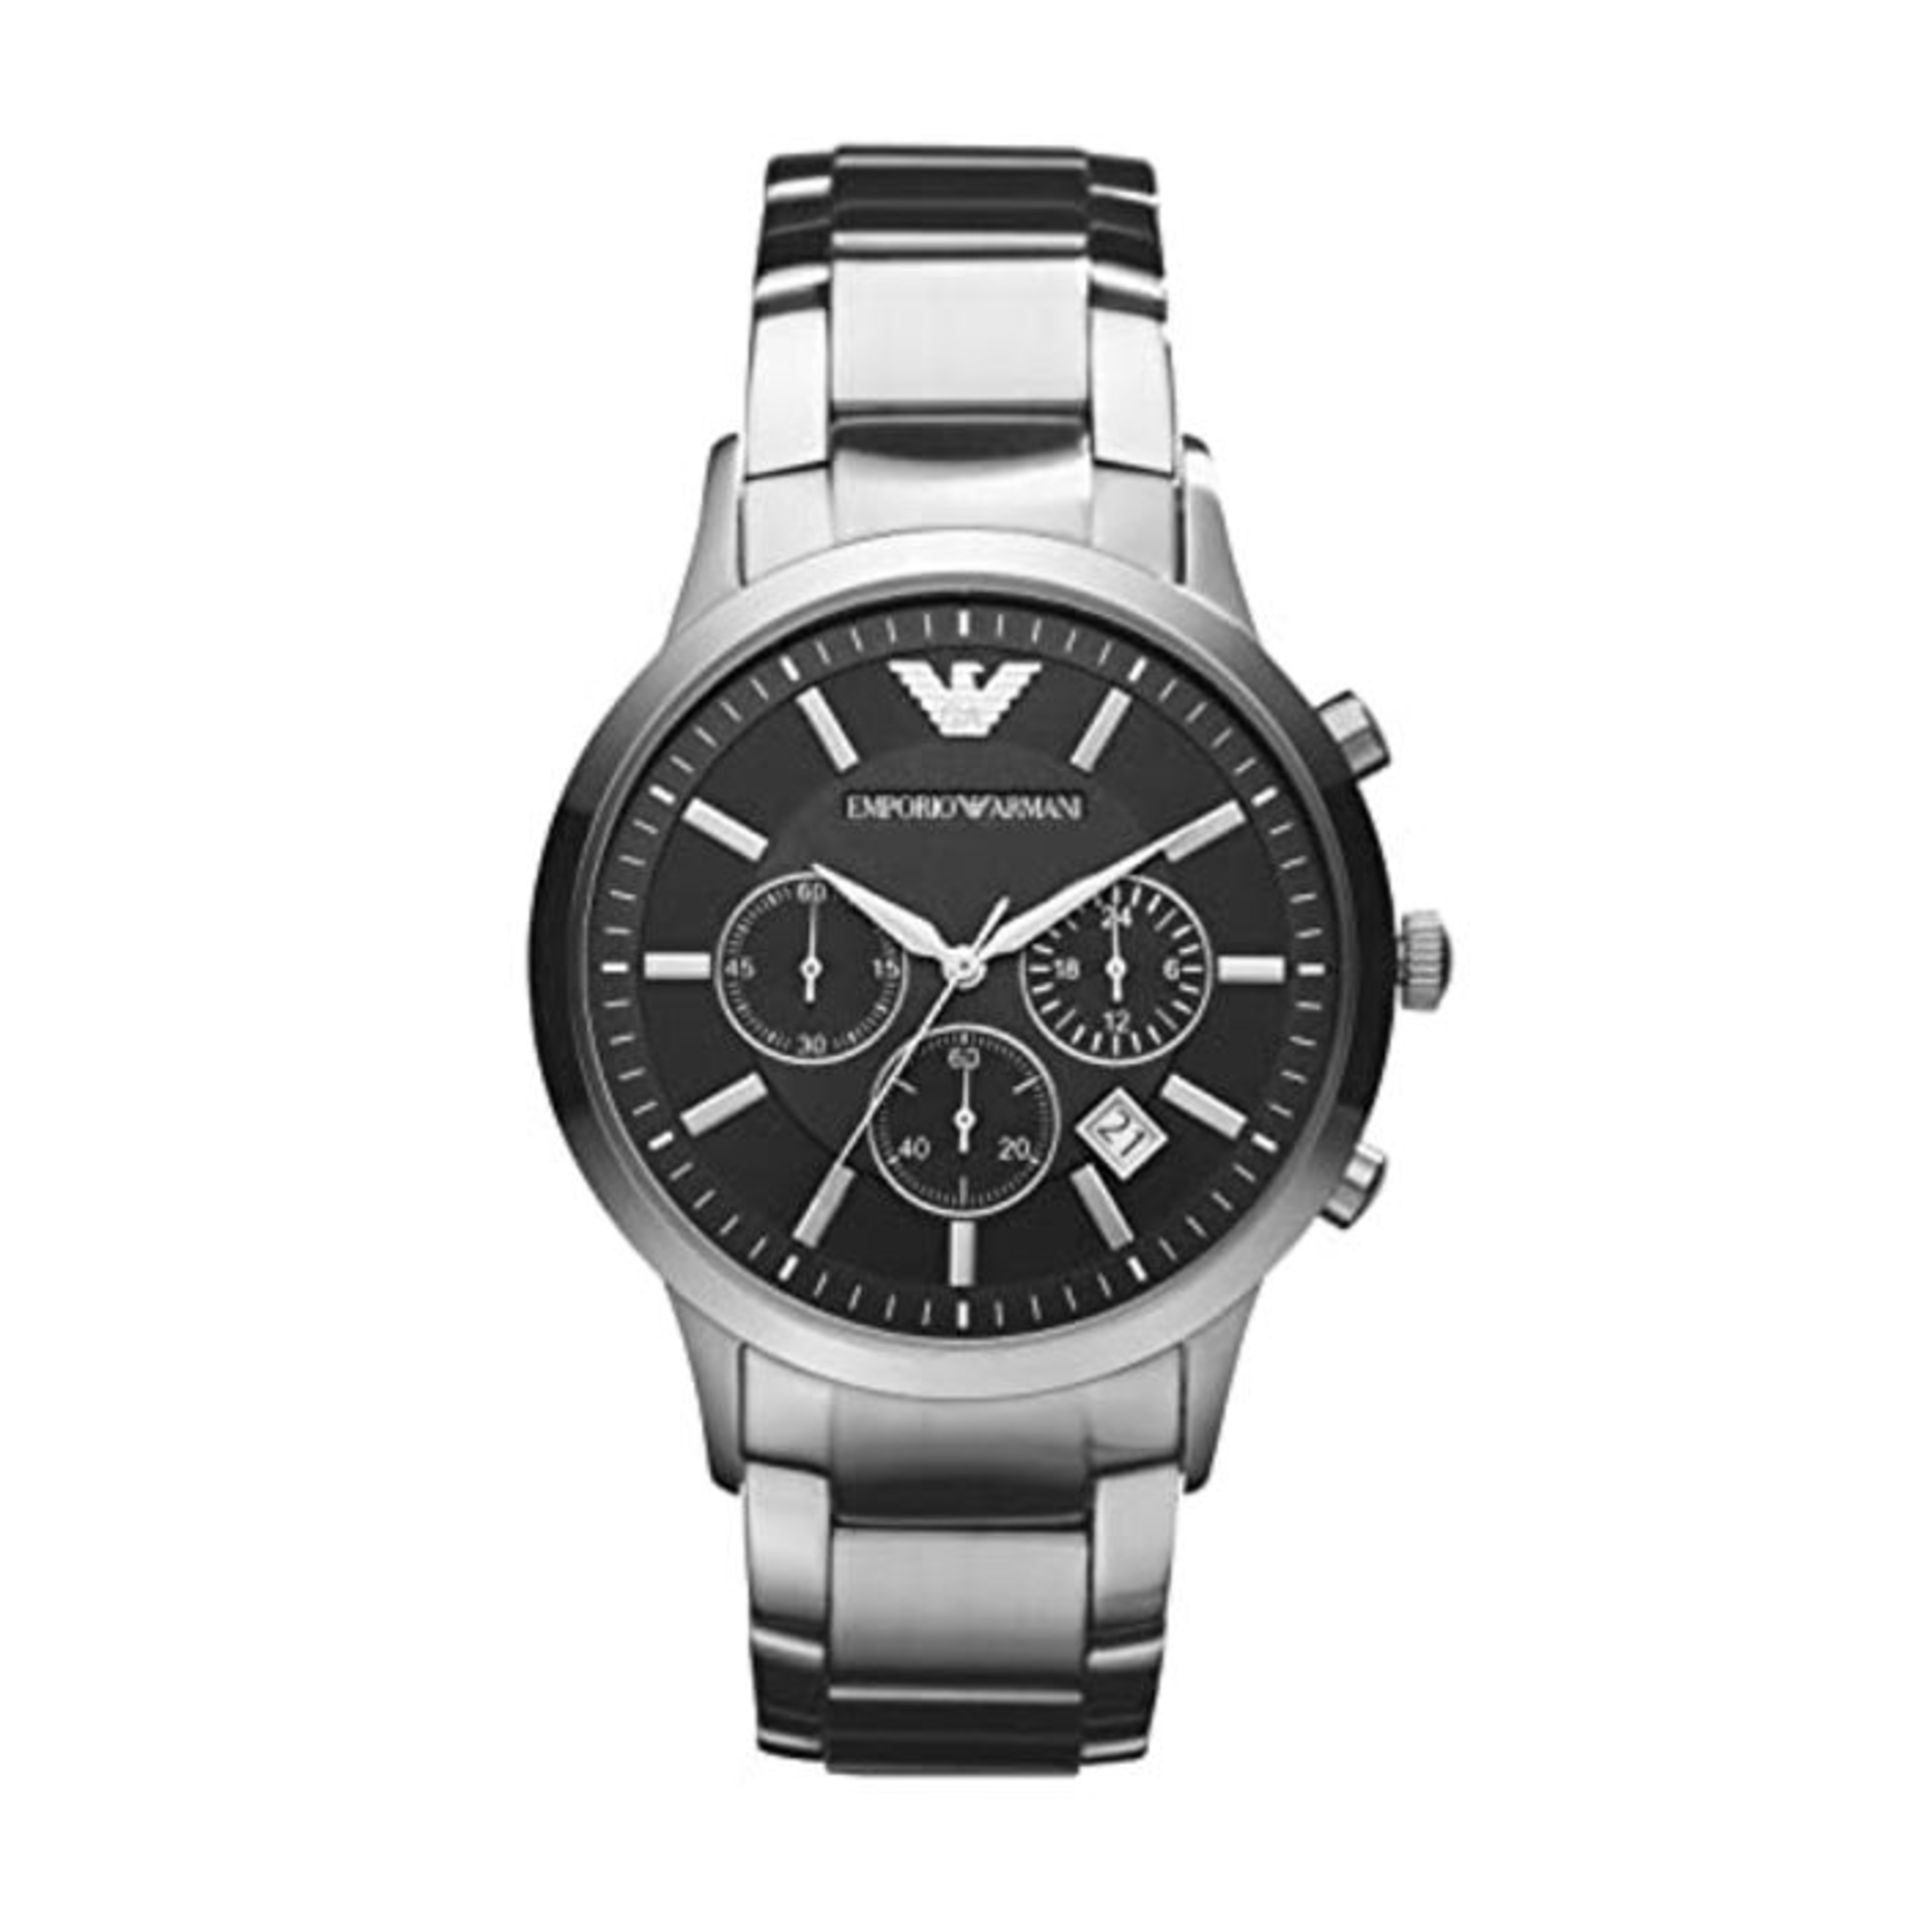 RRP £296.00 Emporio Armani Men's Chronograph Quartz Watch with Stainless Steel Strap AR2434